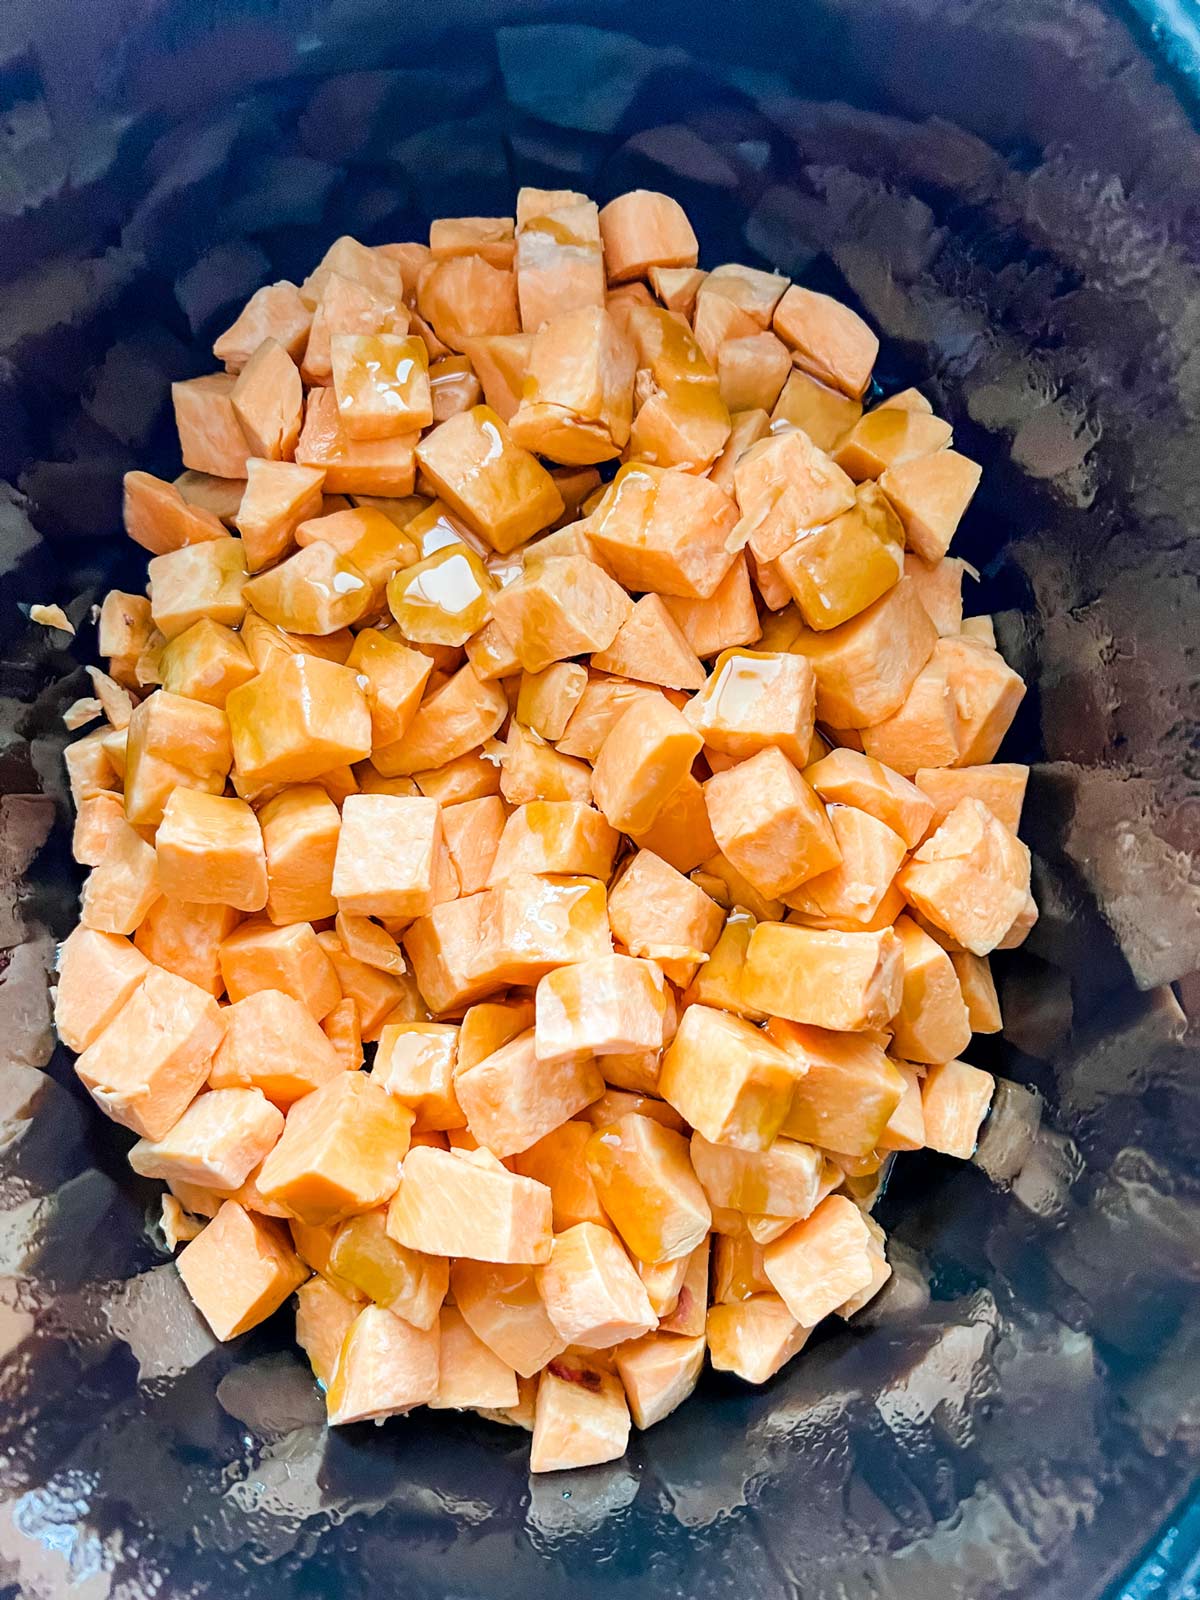 Cubed sweet potatoes in a slow cooker.